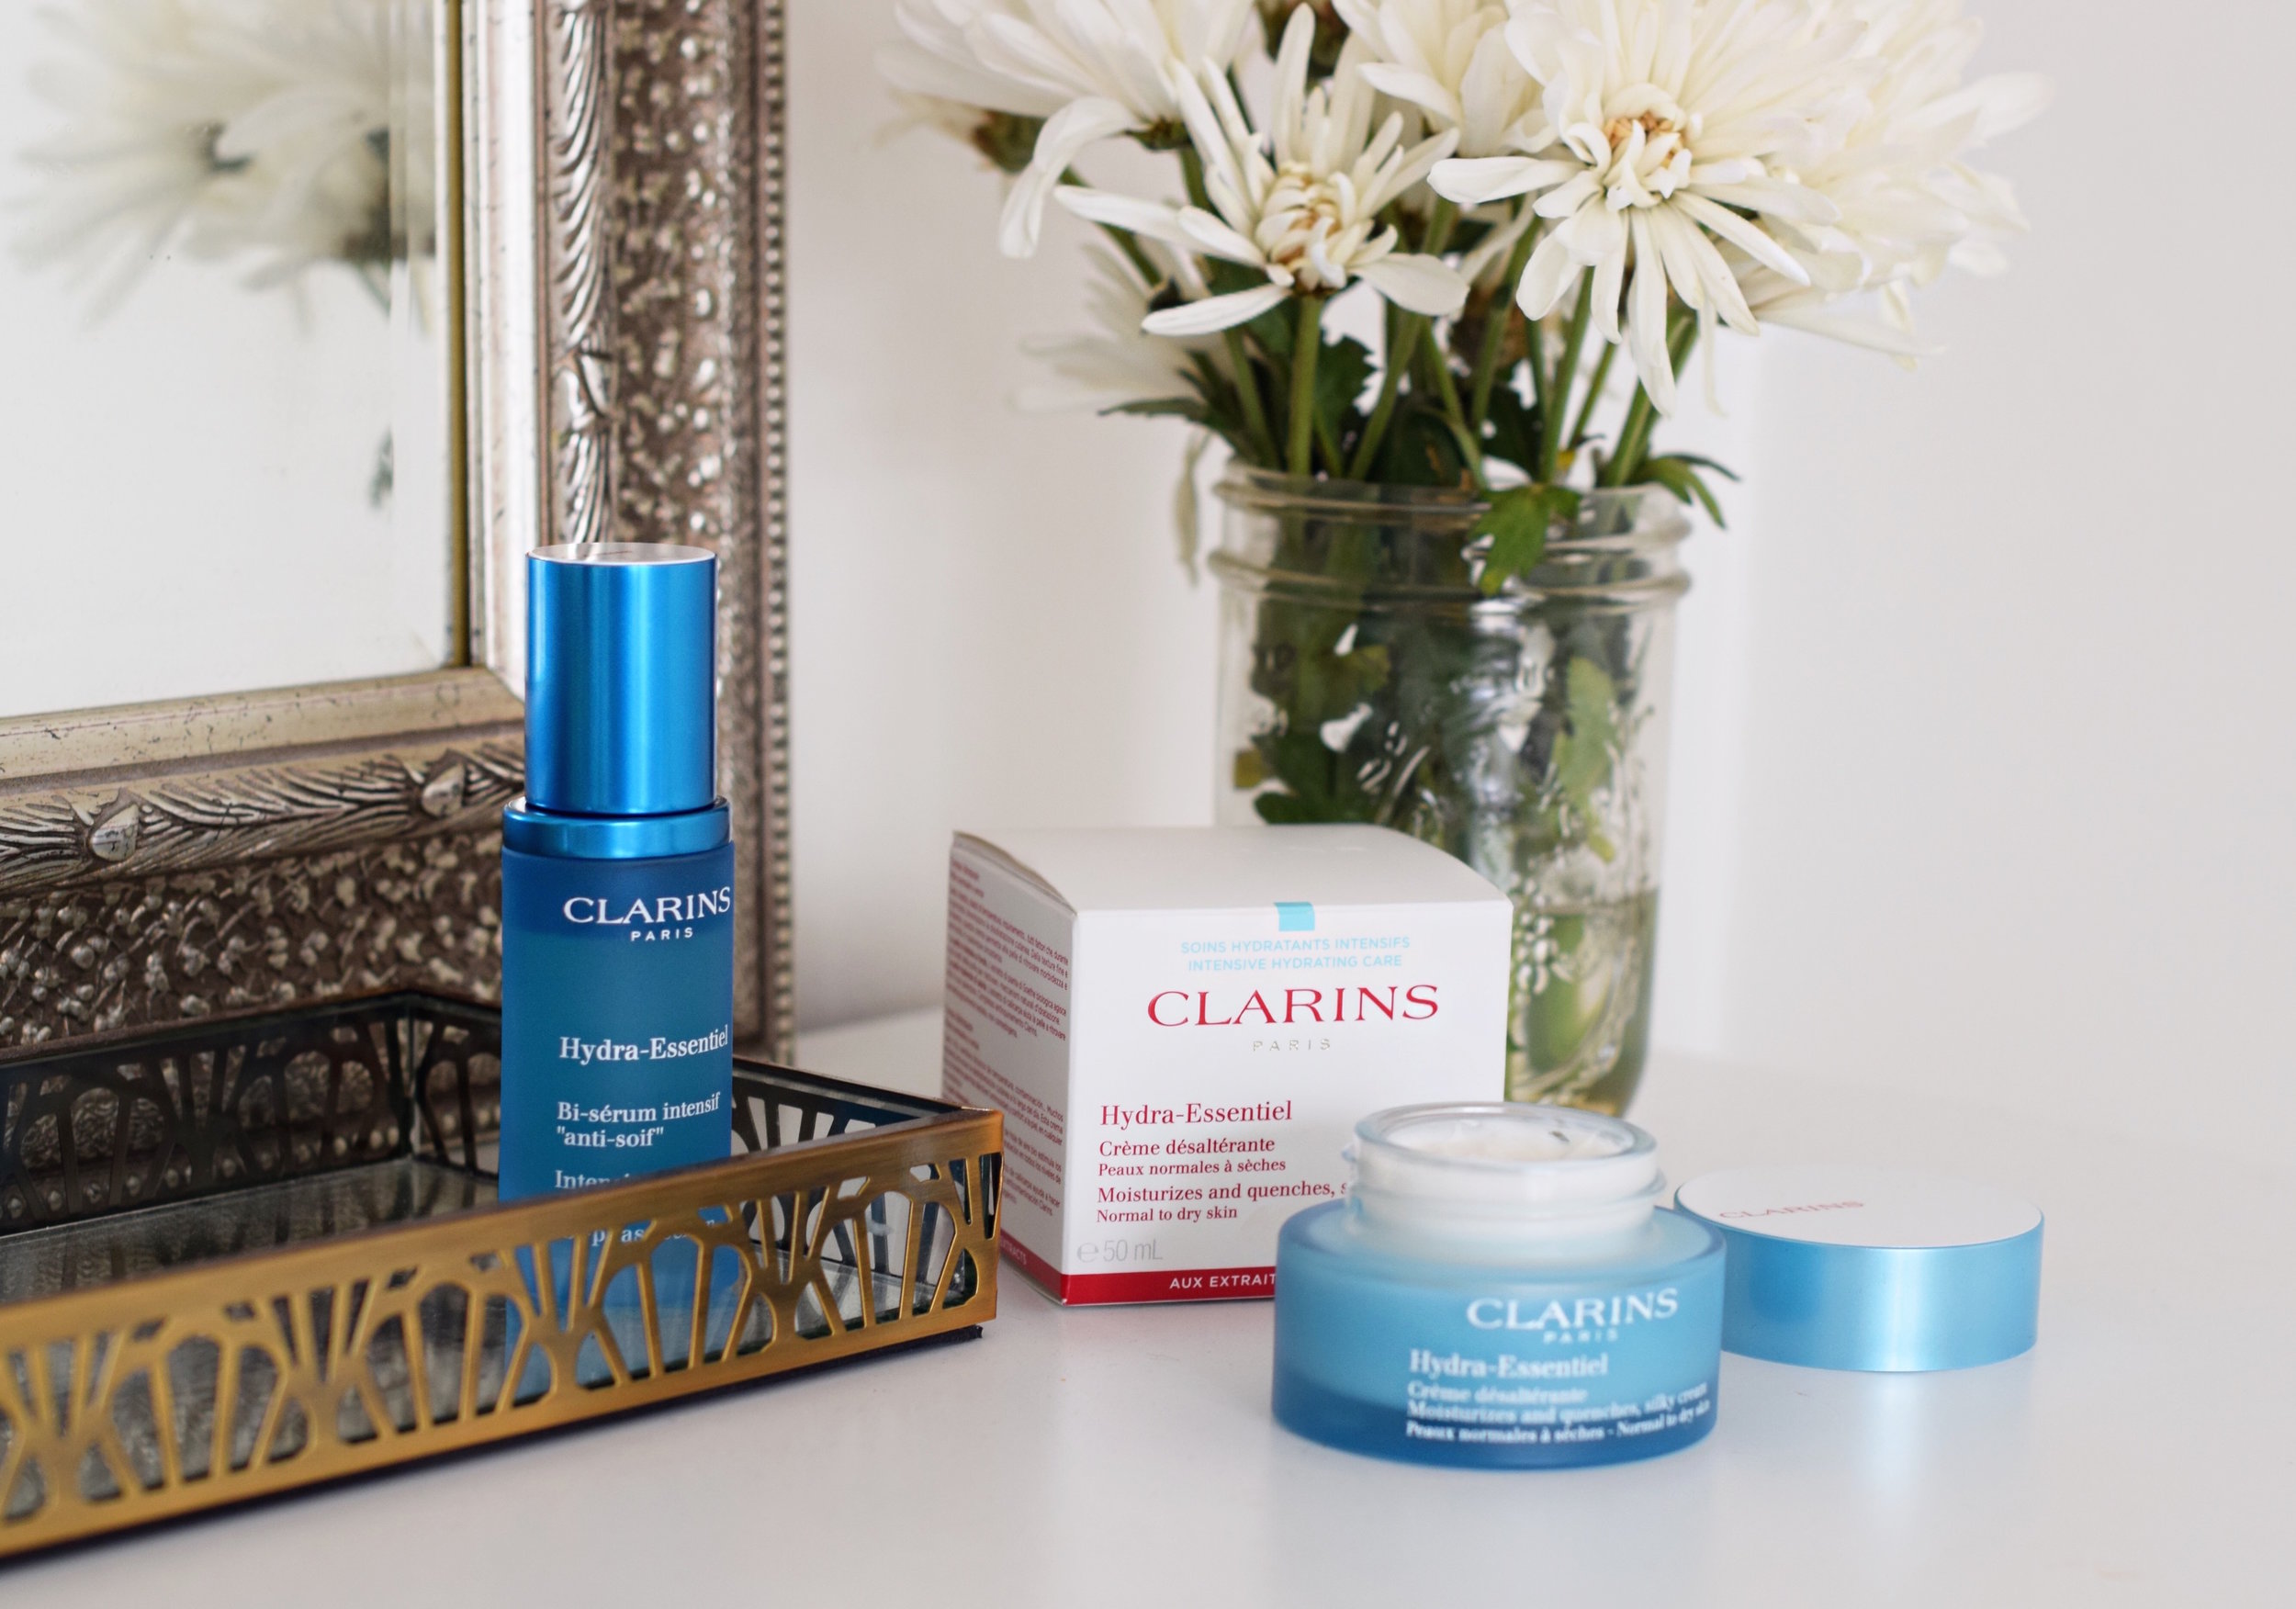 Clarins Hydra-Essentiel Bi-phase serum and moisturizer Louboutins & Love Esther Santer NYC Street Style Blogger Beauty Product Review Skin Routine Blue Packaging Shop Buy Lotion Girl Women Skincare Sephora Macys Lord & Taylor.JPG